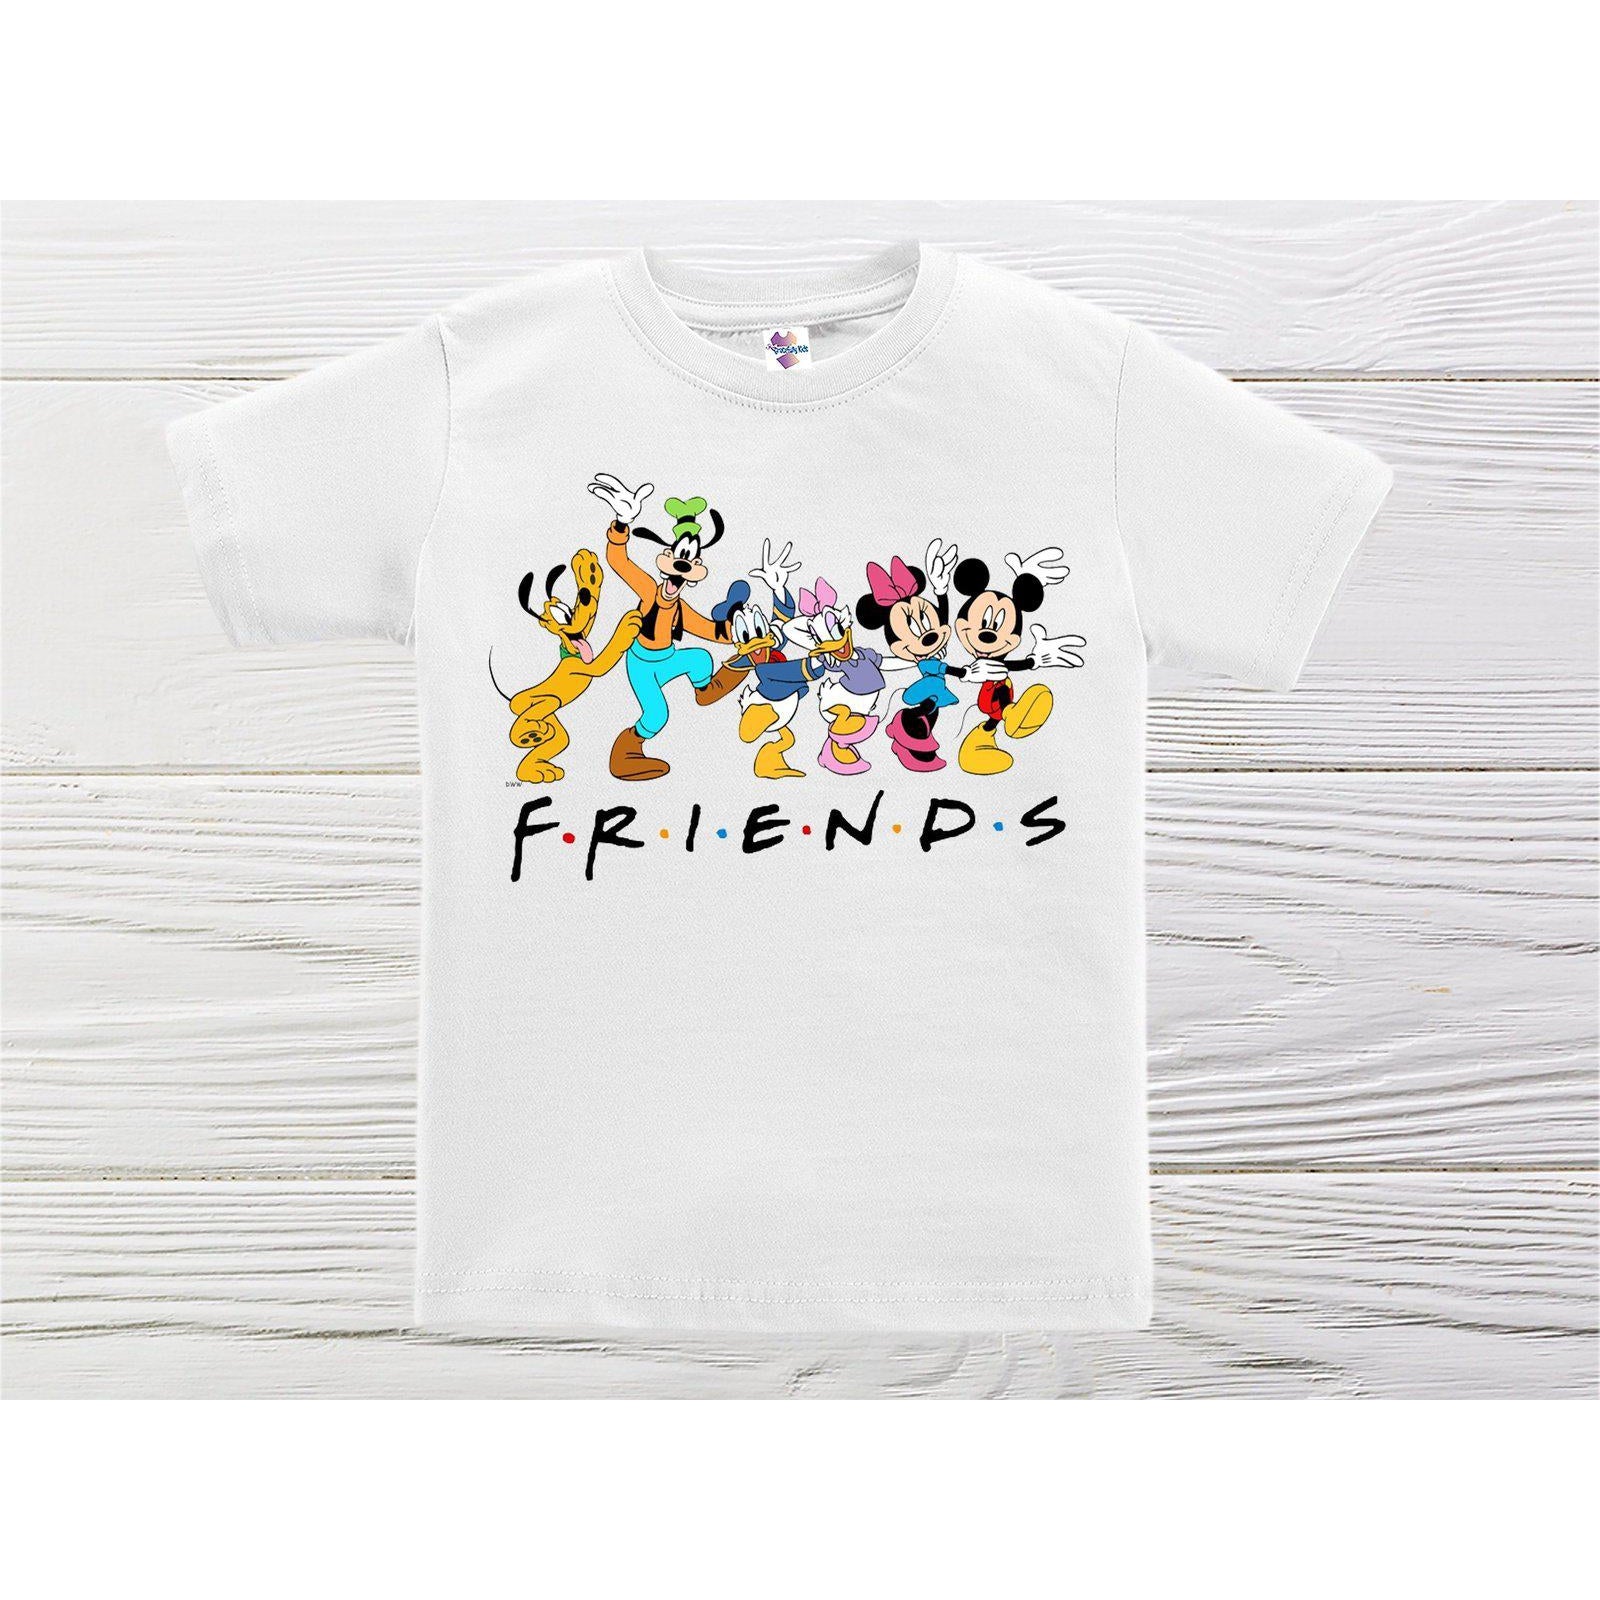 Mickey and friends shirt